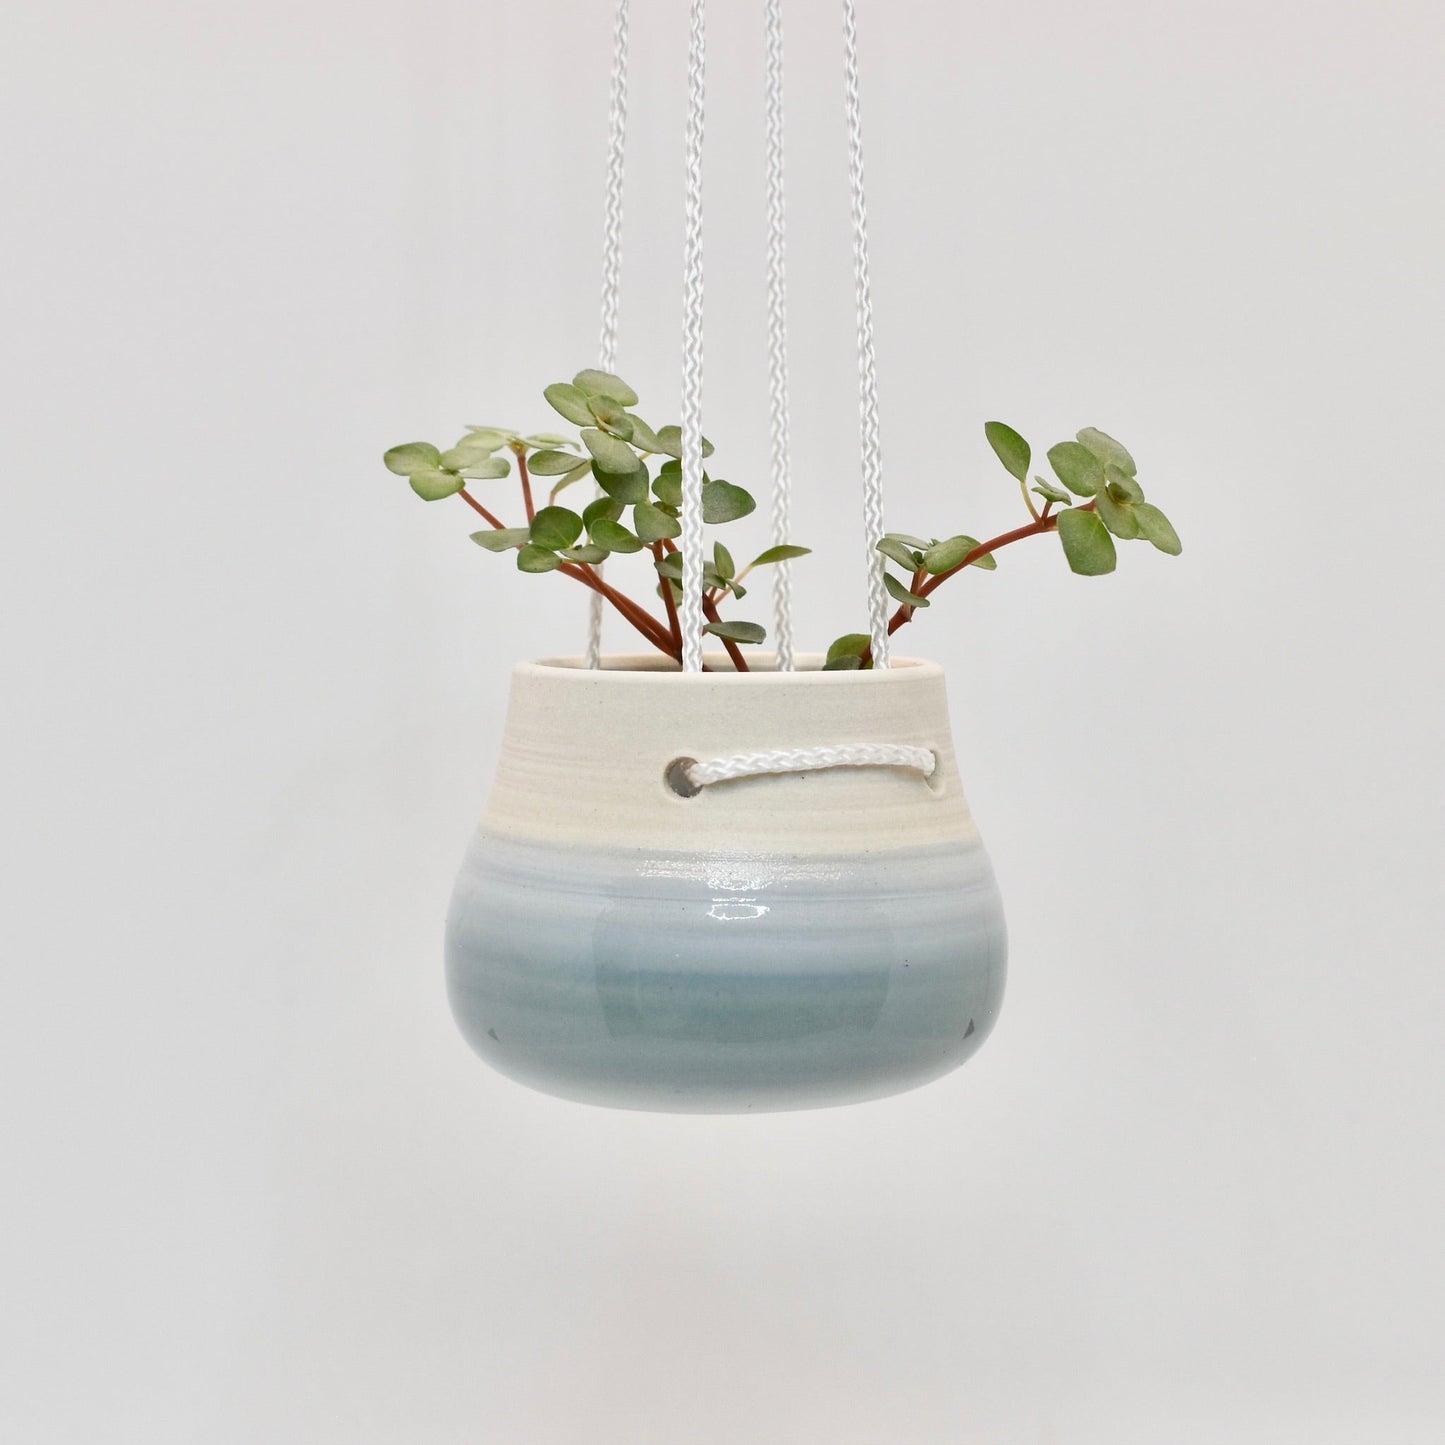 Pearl Little Hanging Planter #1015